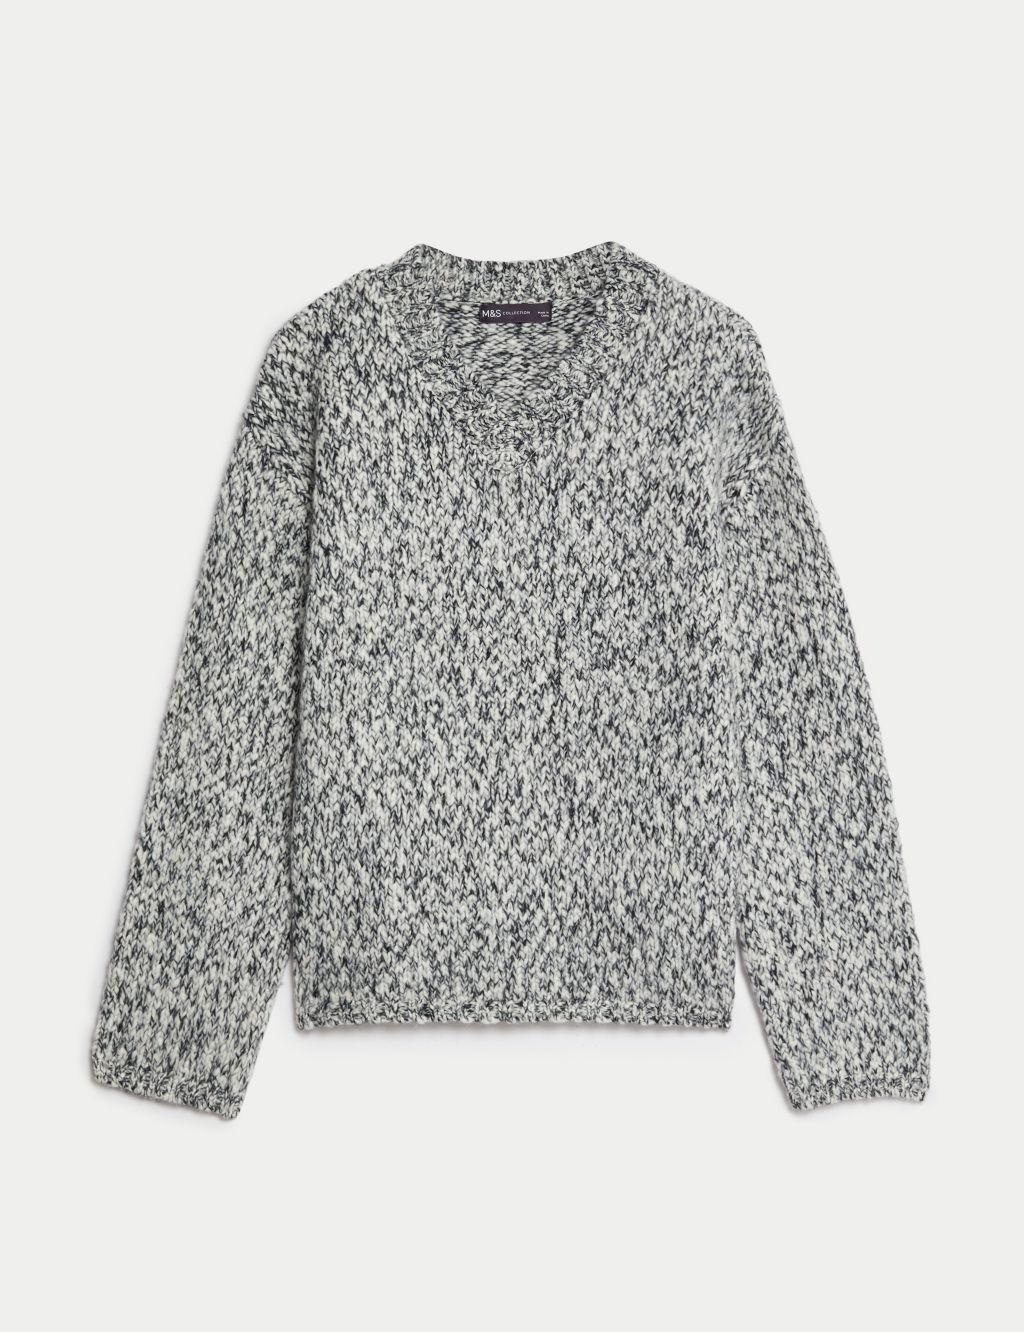 Textured V-Neck Jumper with Wool image 2